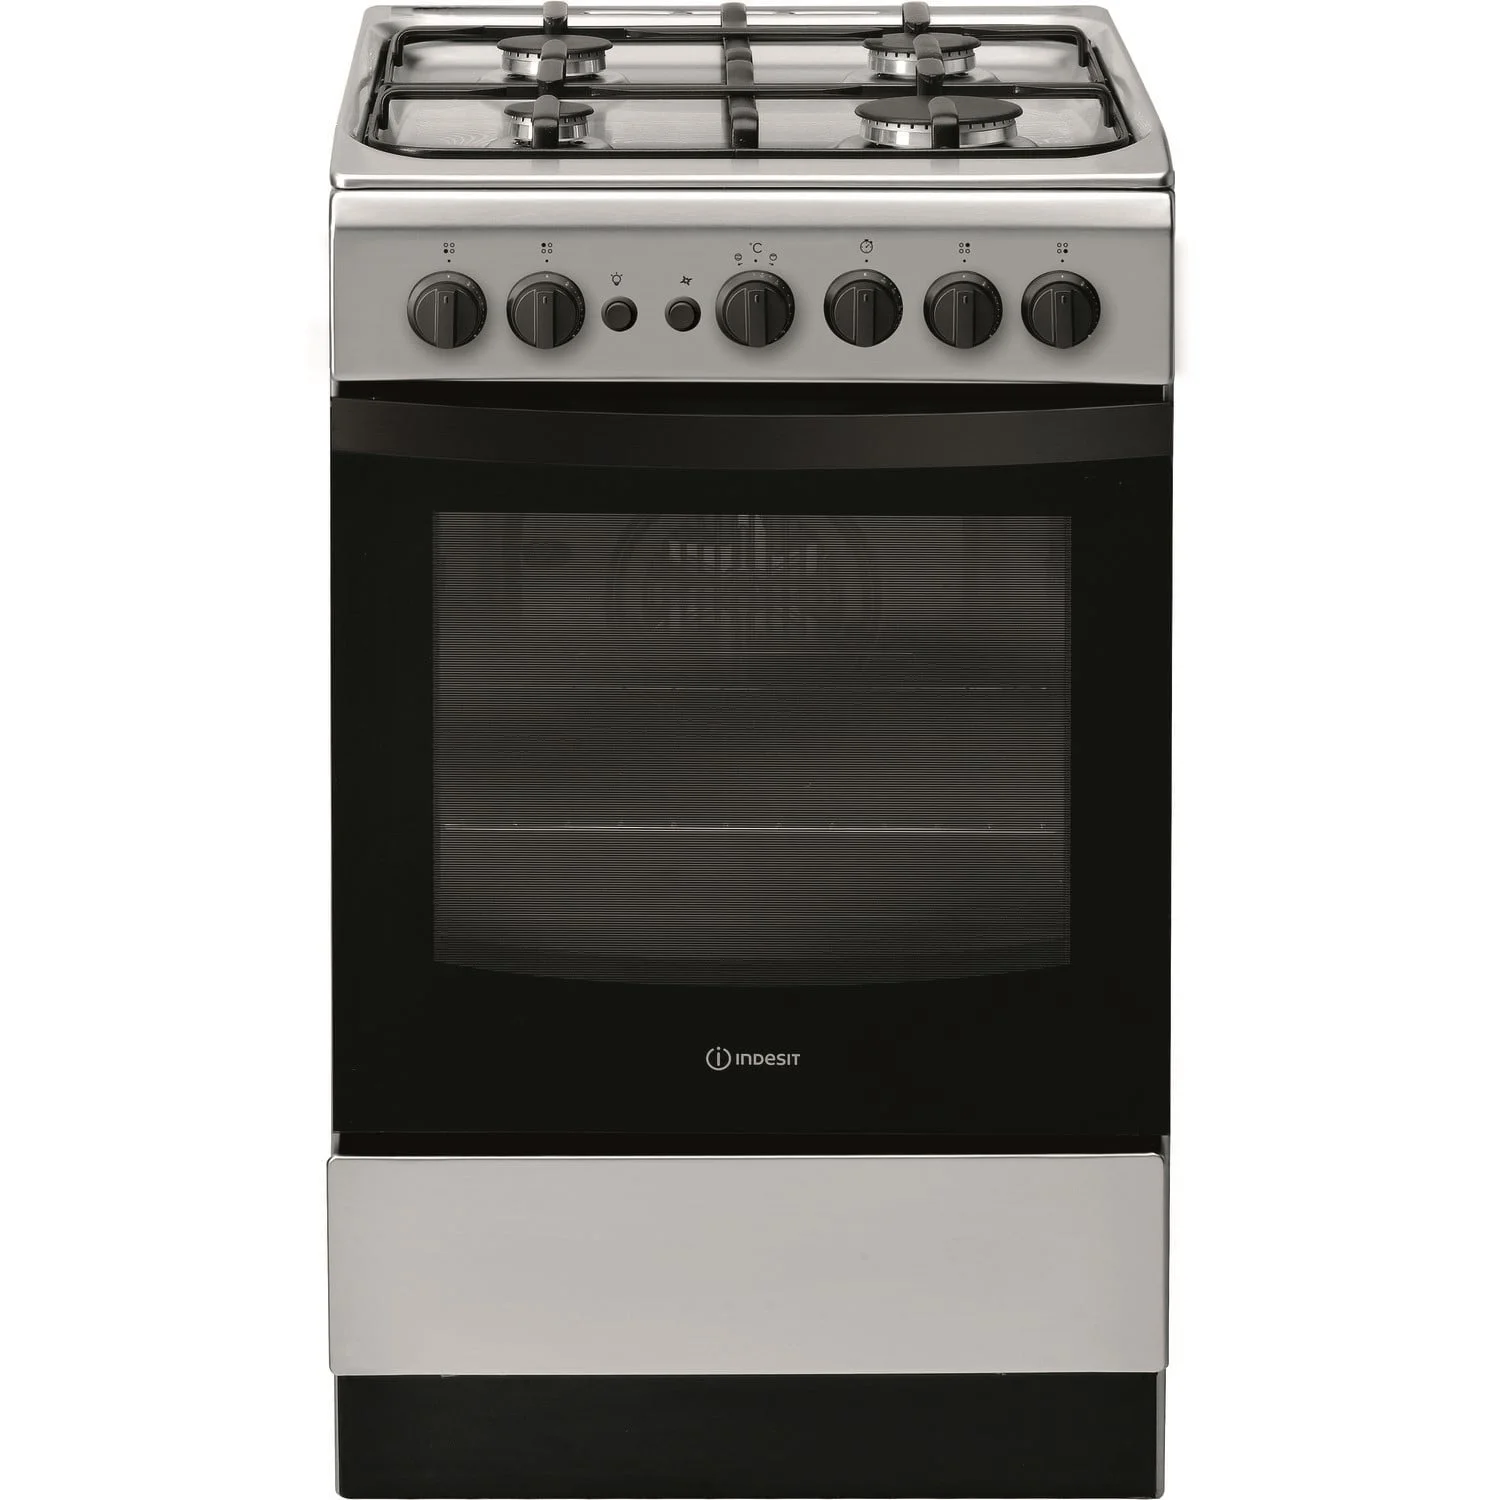 Indesit  IS5G1PMSS 50cm Gas Cooker - Silver